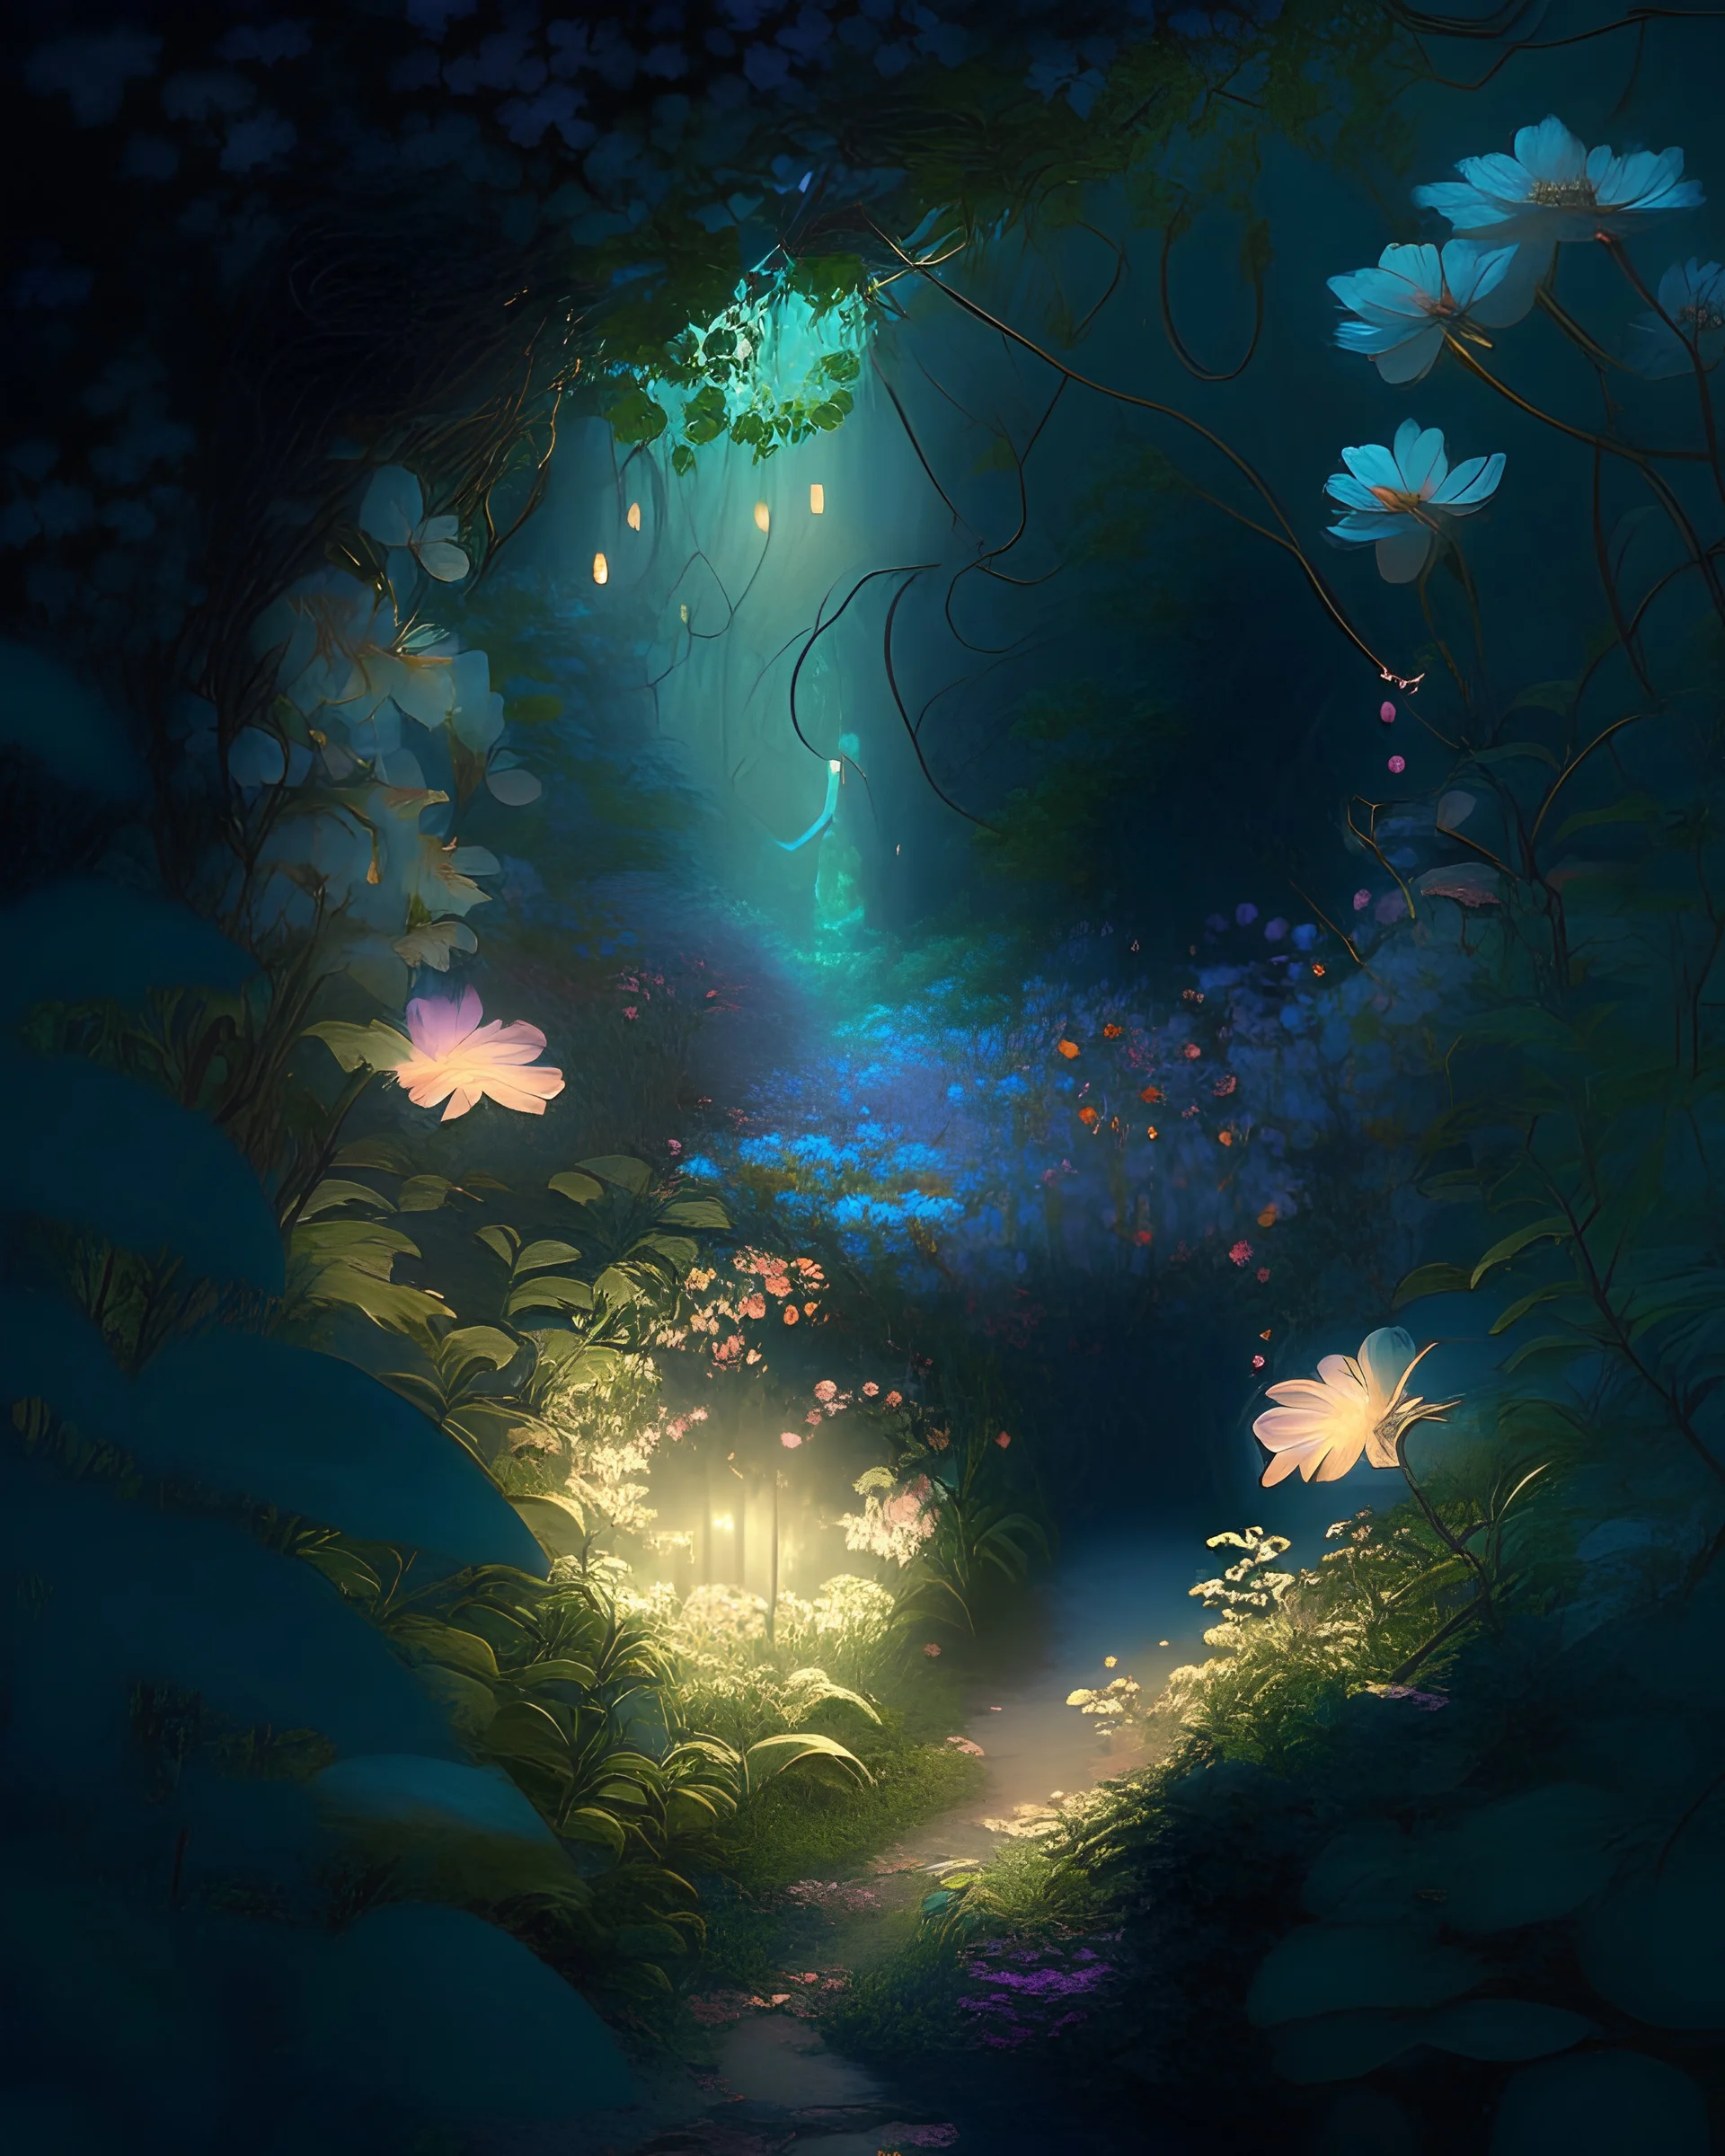 A hidden garden filled with luminescent flowers, casting a soft glow on the surrounding foliage and mysterious pathways.